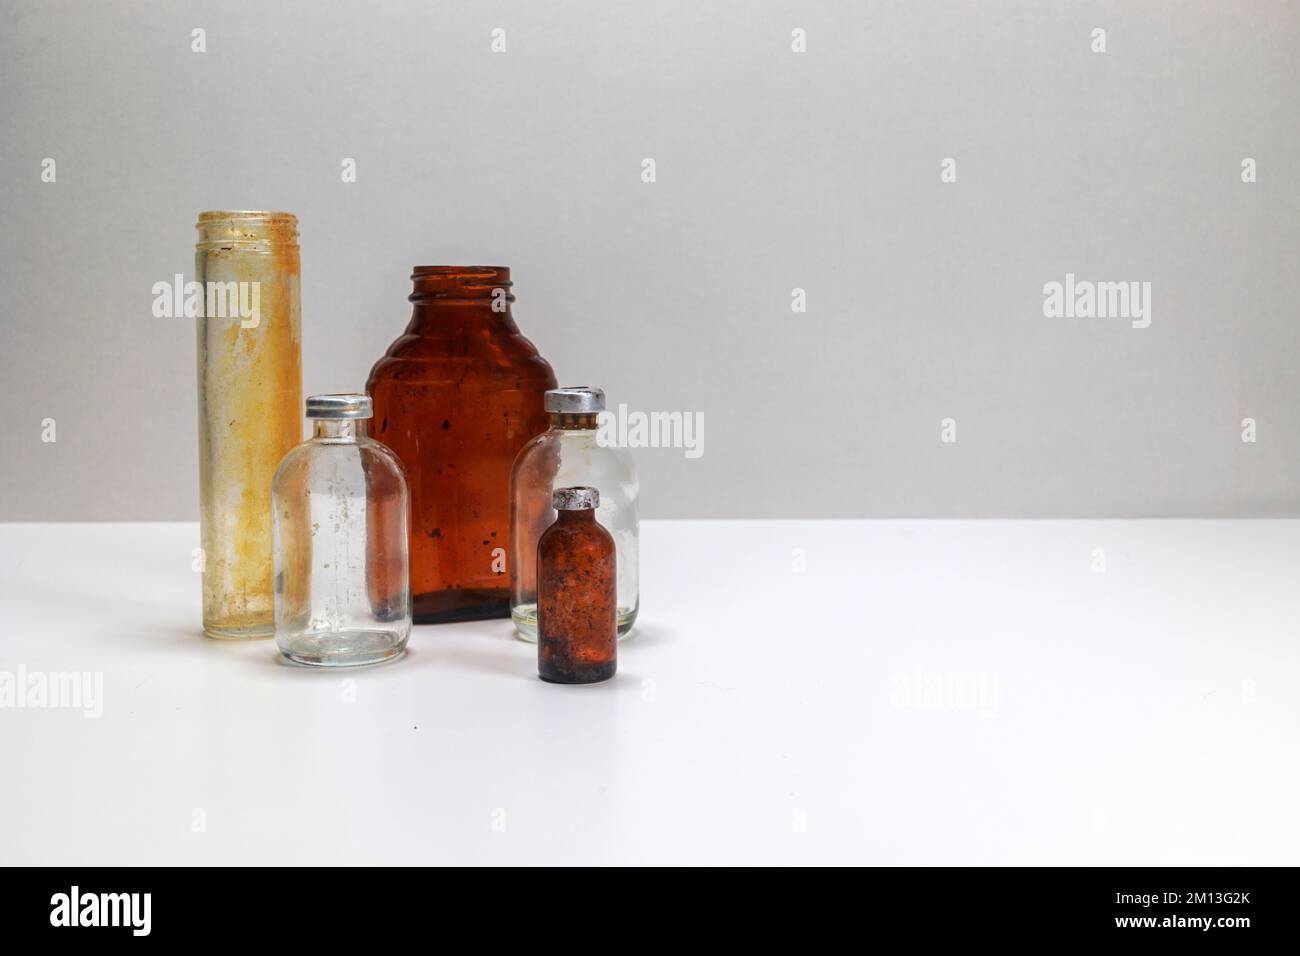 Empty Plastic RX Pill Medicine Bottles Containers Amber Reversible Lid –  Mason City Poster Company